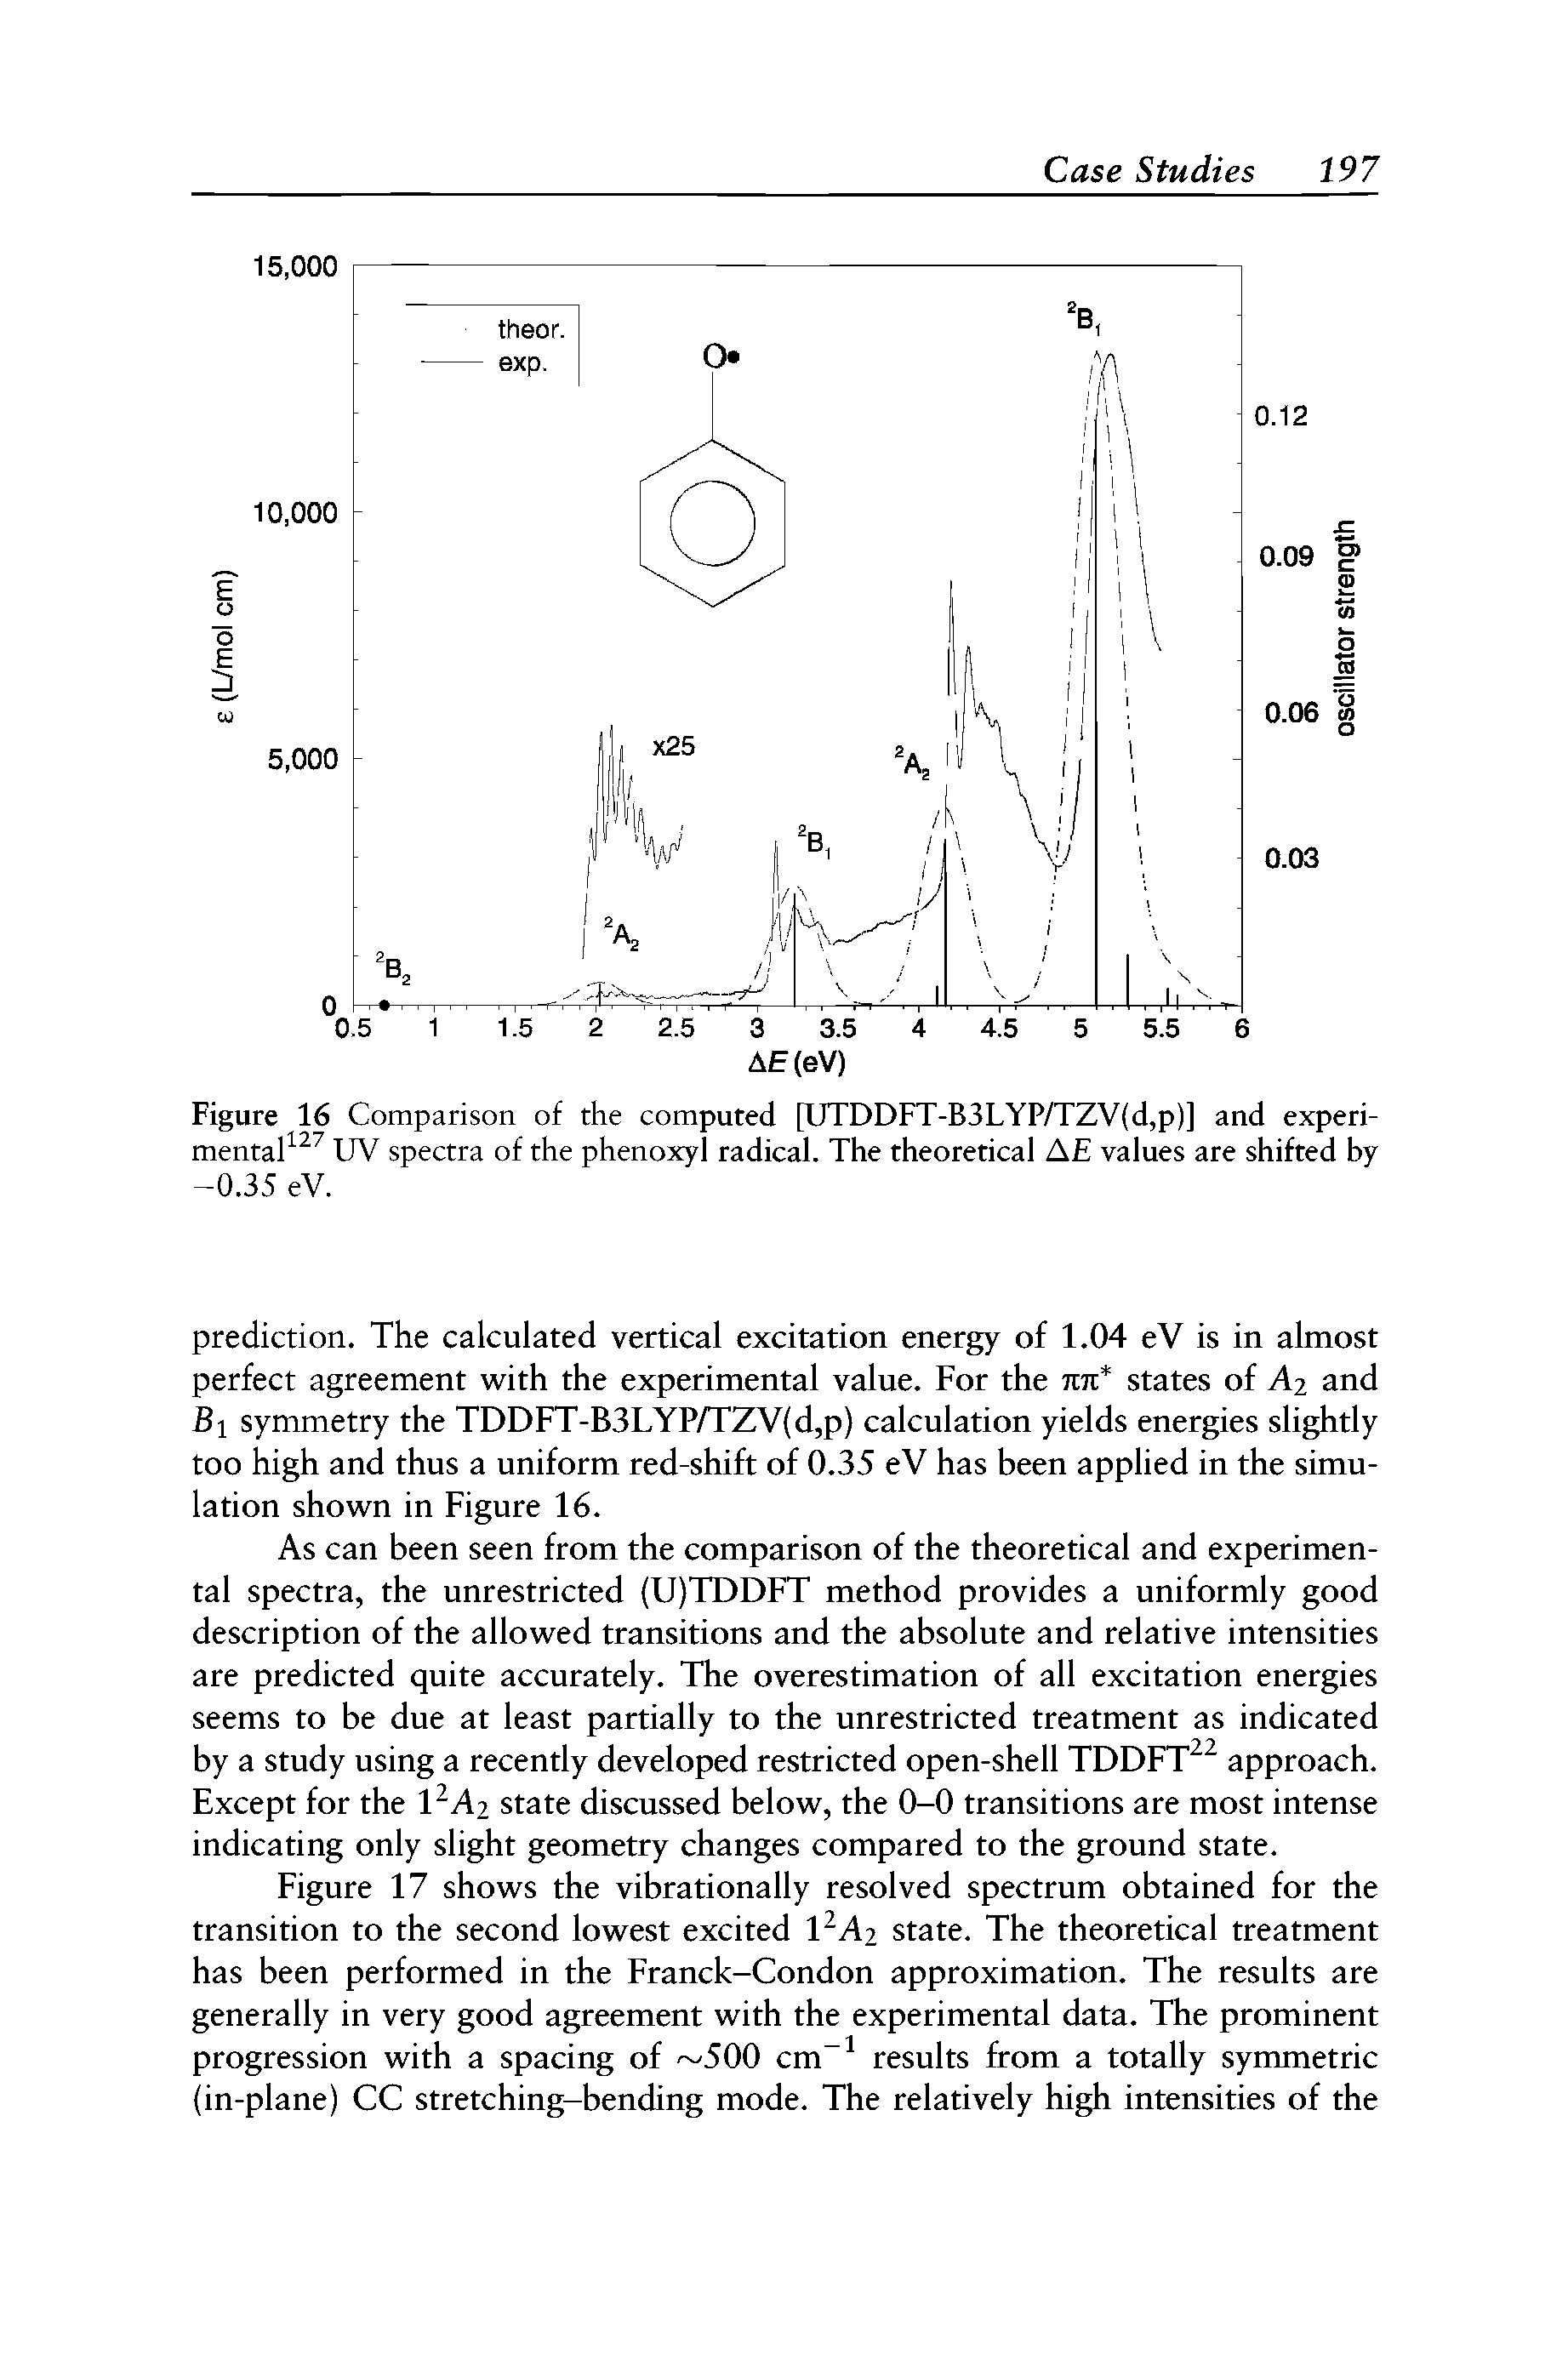 Figure 16 Comparison of the computed [UTDDFT-B3LYP/TZV(d,p)] and experi-mental UV spectra of the phenoxyl radical. The theoretical A values are shifted by...